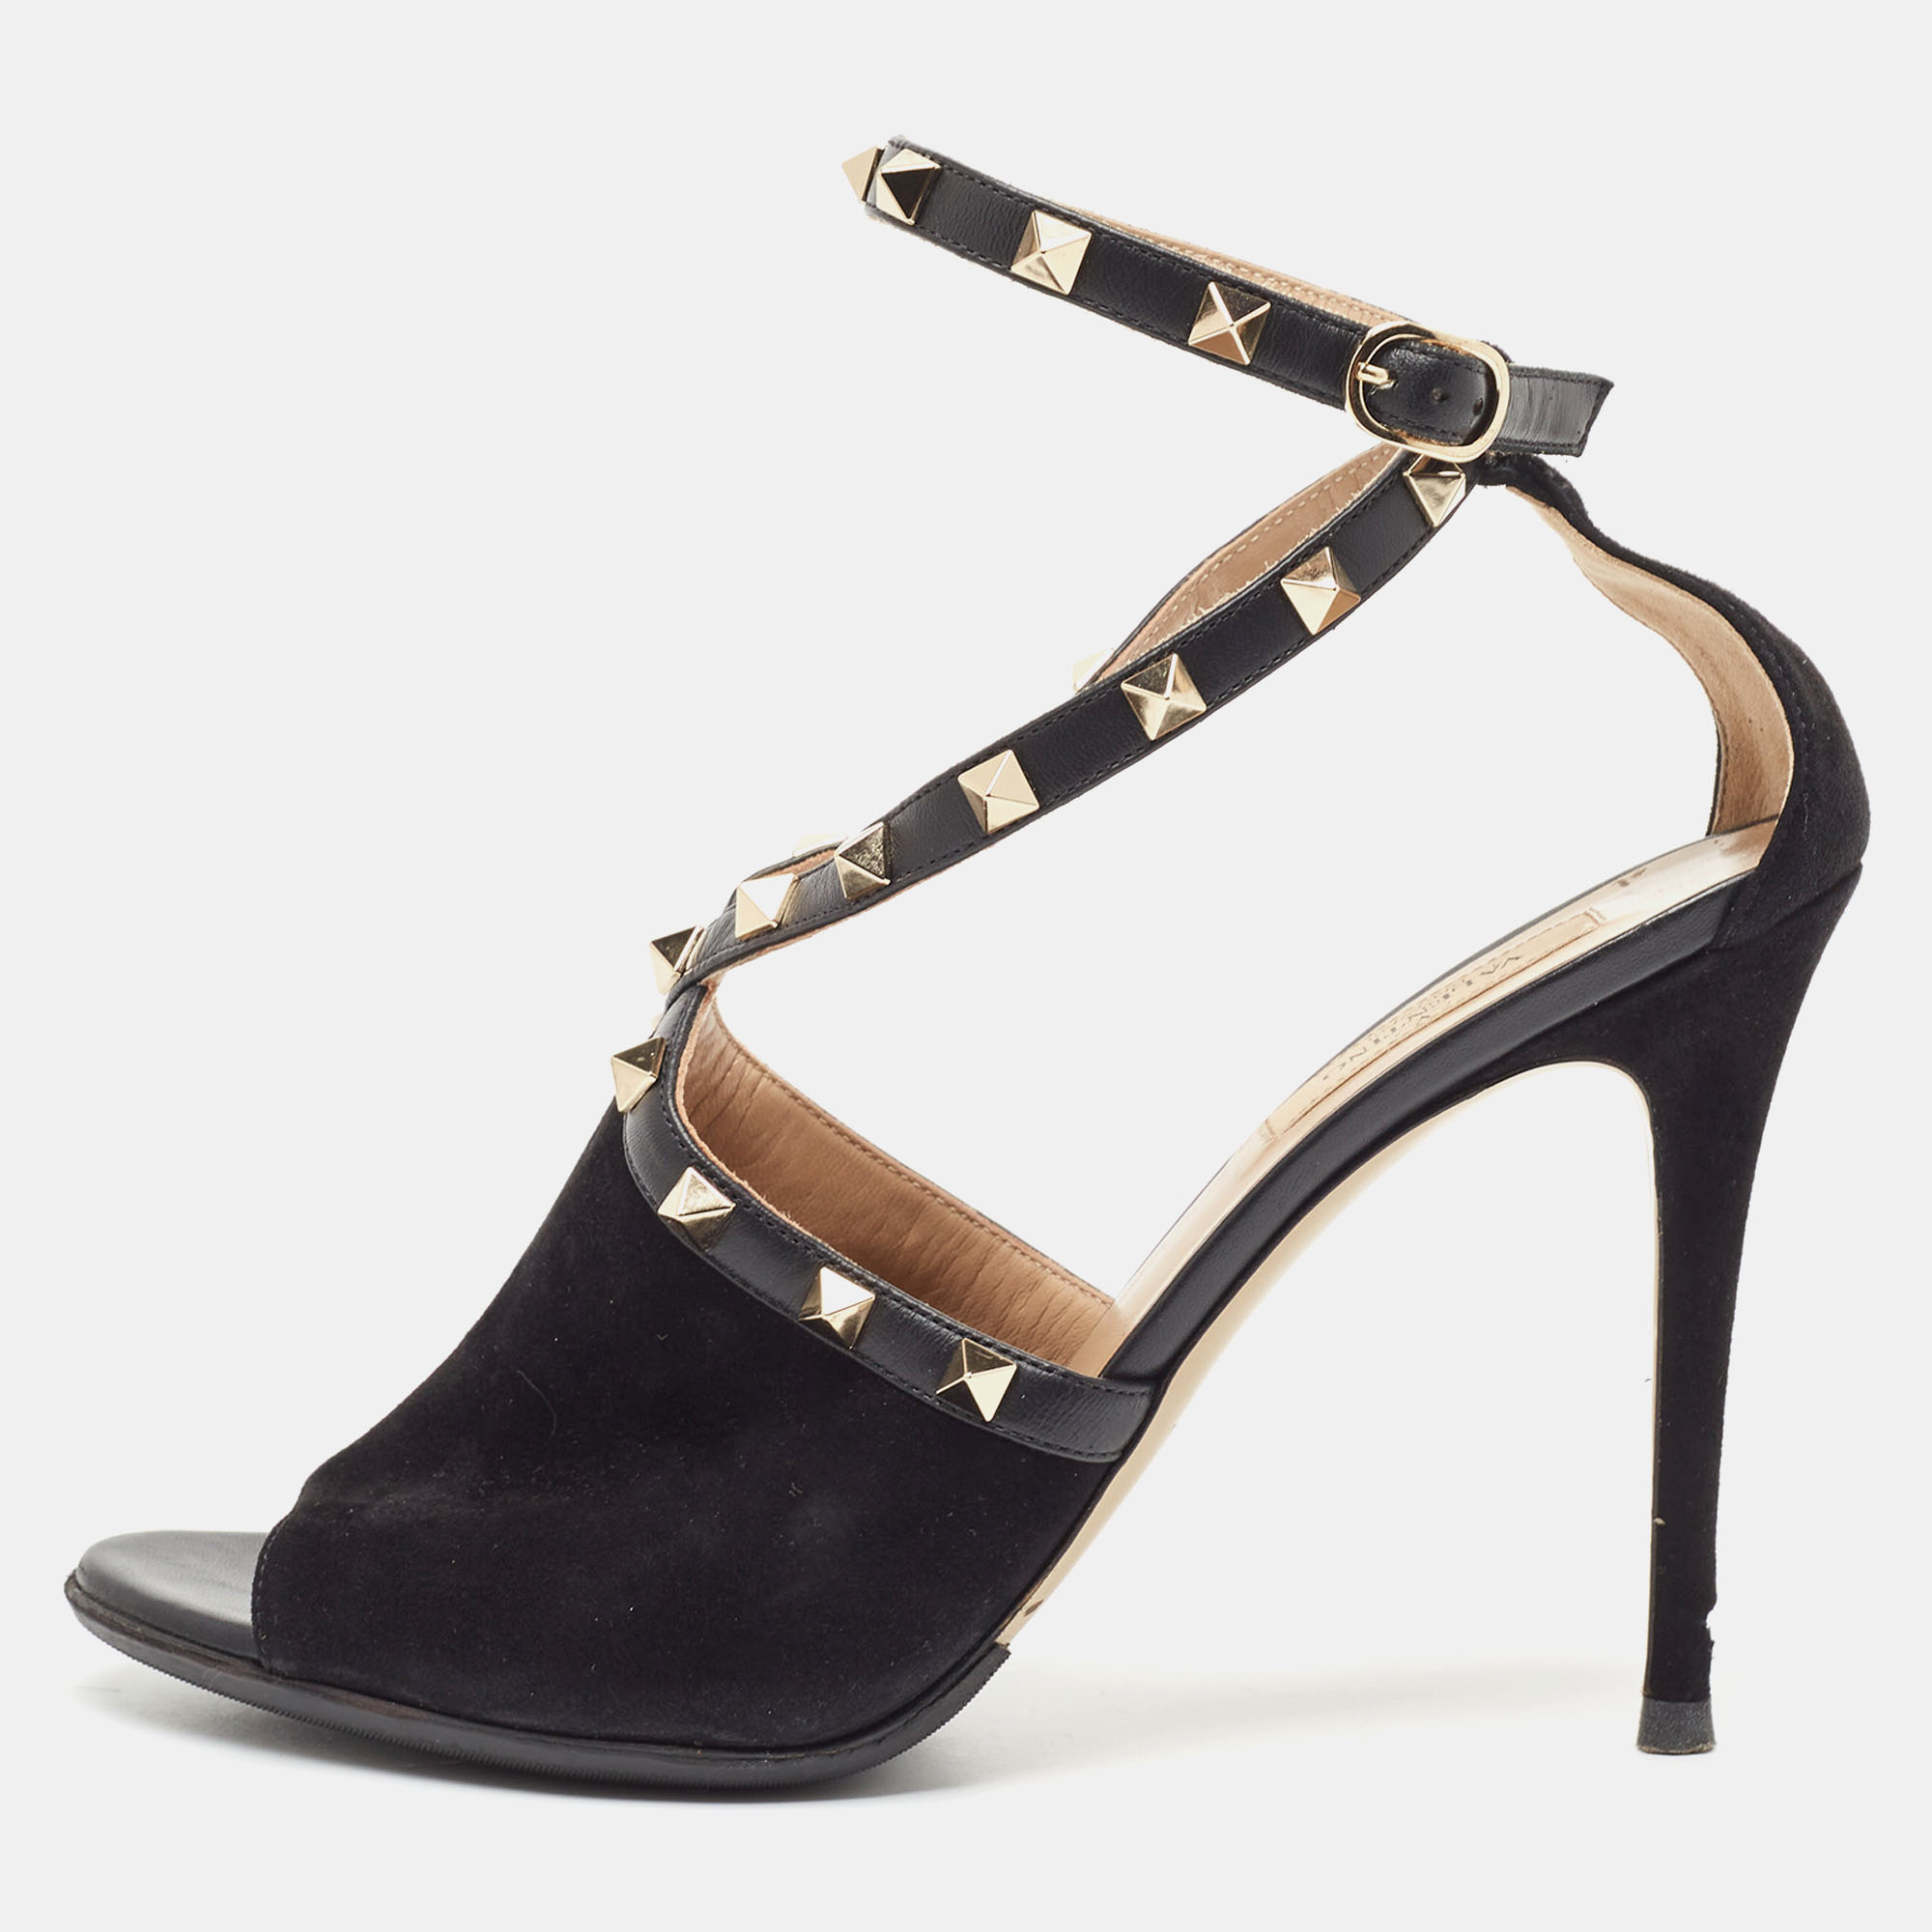 Valentino black suede and leather rockstud ankle strap sandals size 40